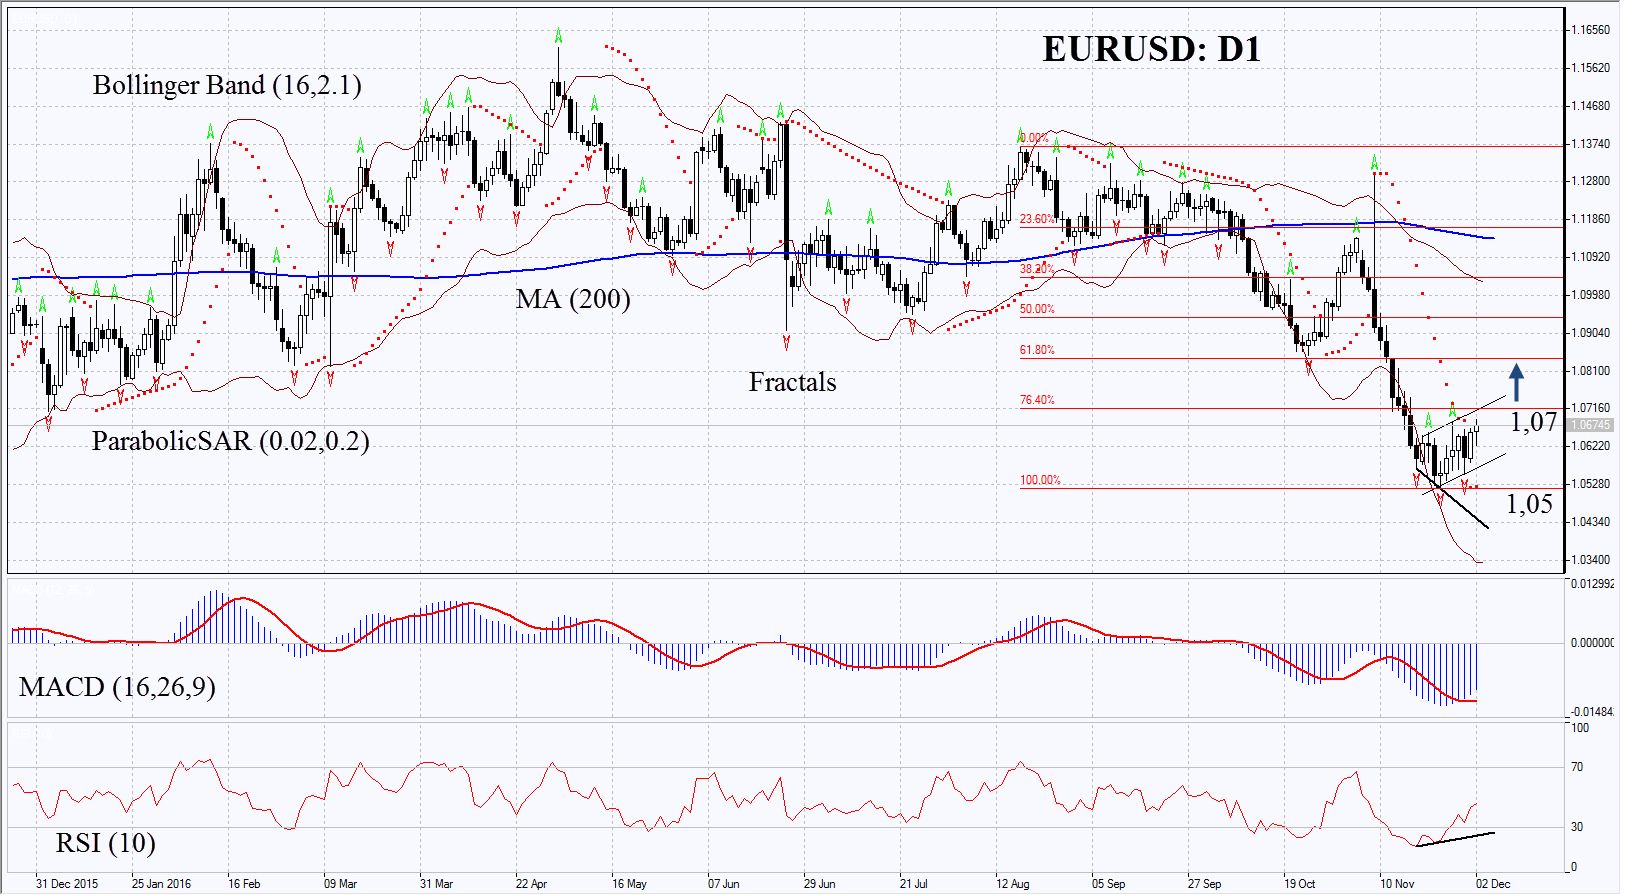 referendum-in-italy-and-elections-in-austria-may-affect-euro-rate-eur-usd-technical-analysis